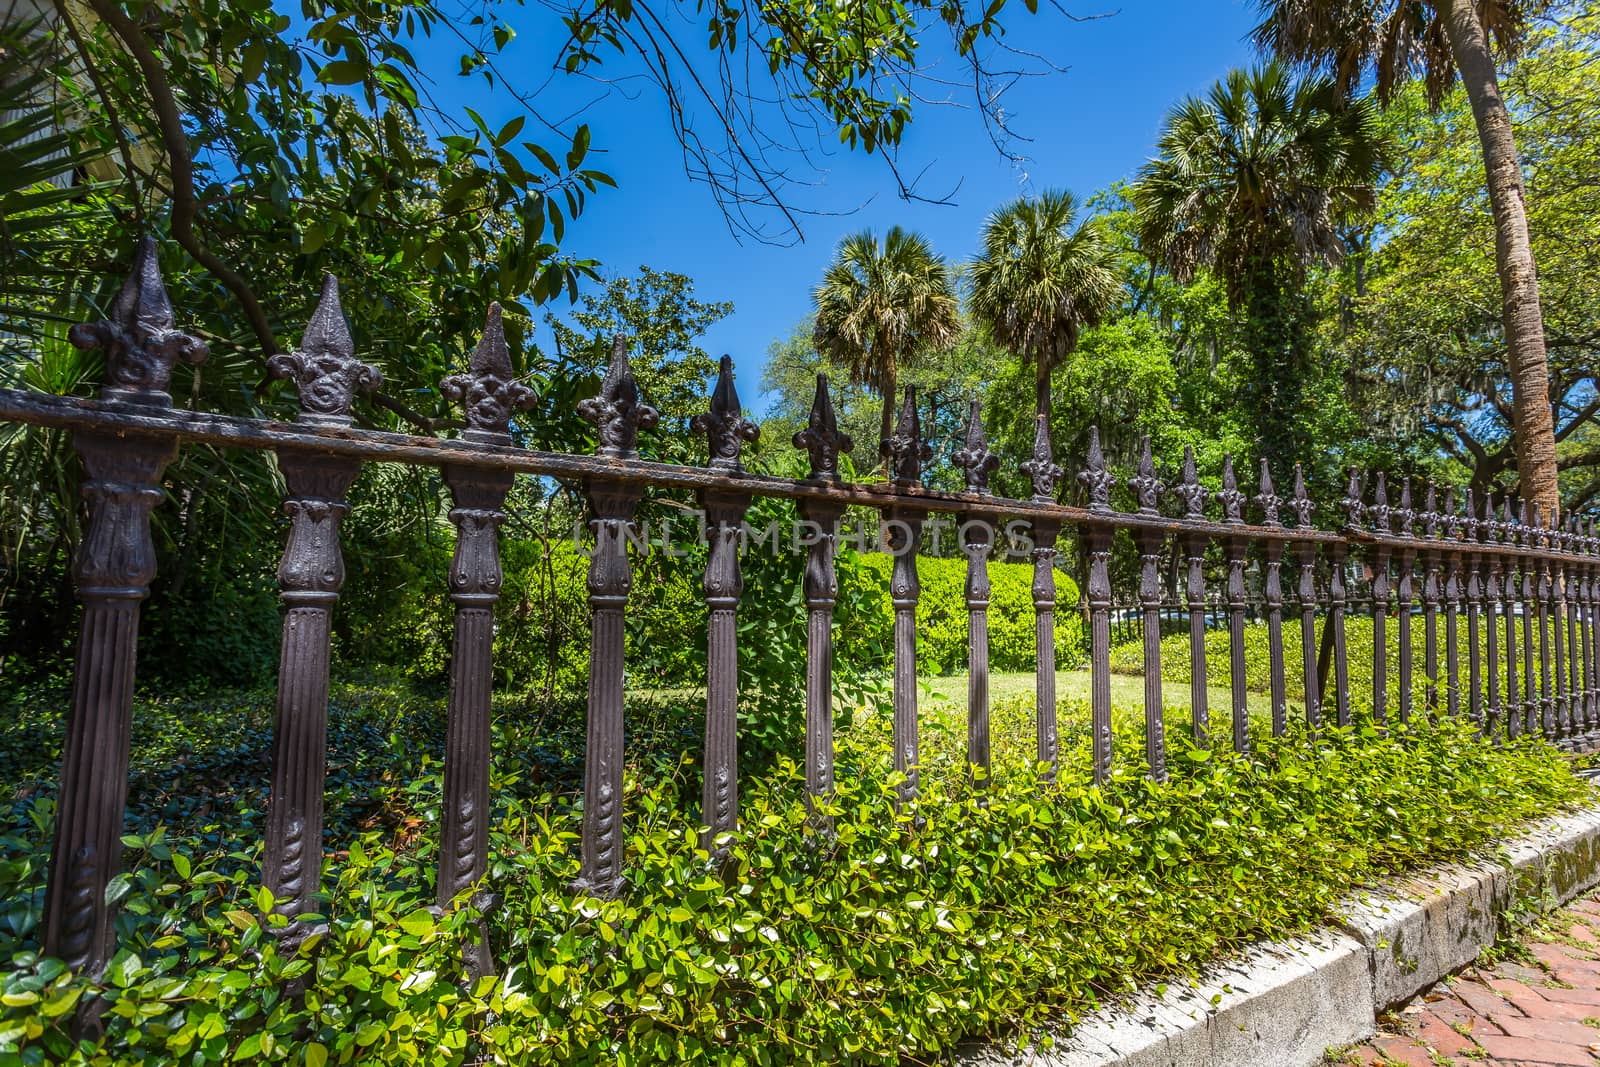 An old ironwork fence in the downtown historic district of Savannah, Georgia.